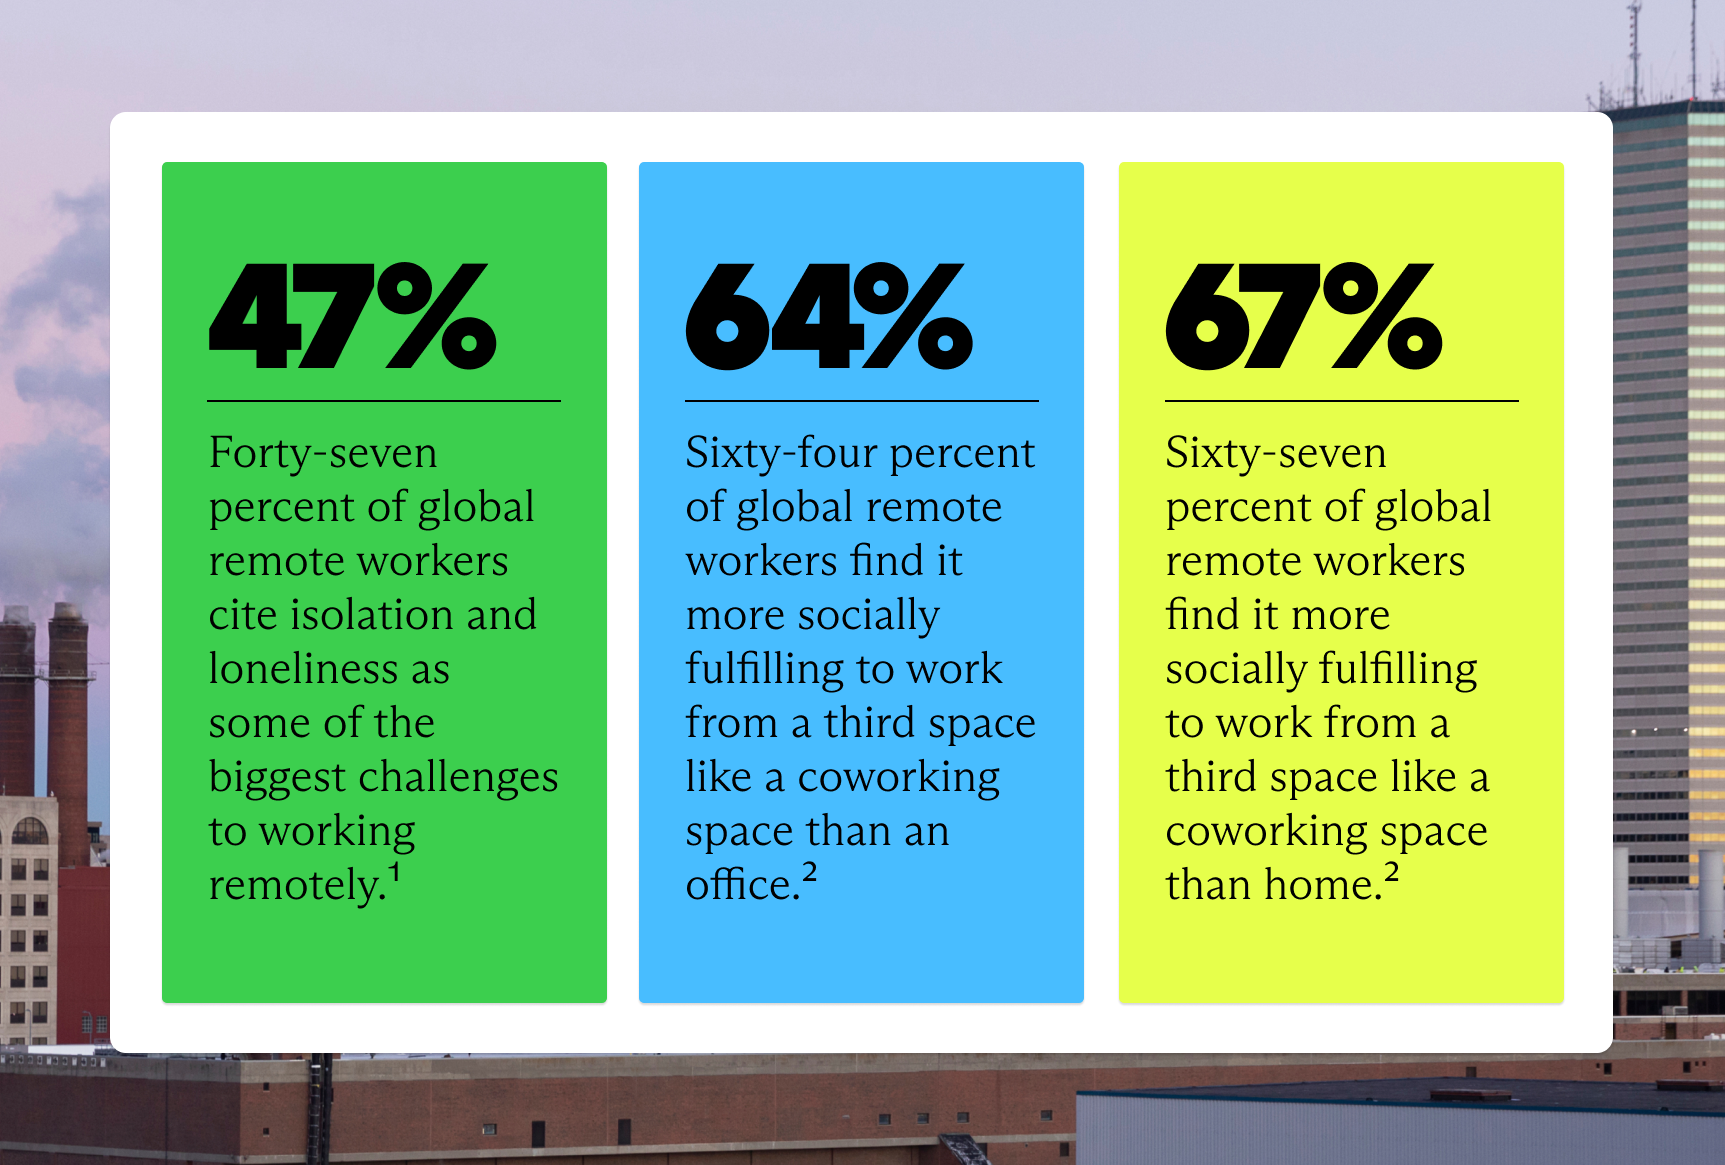 Global remote workers want to work from a coworking space